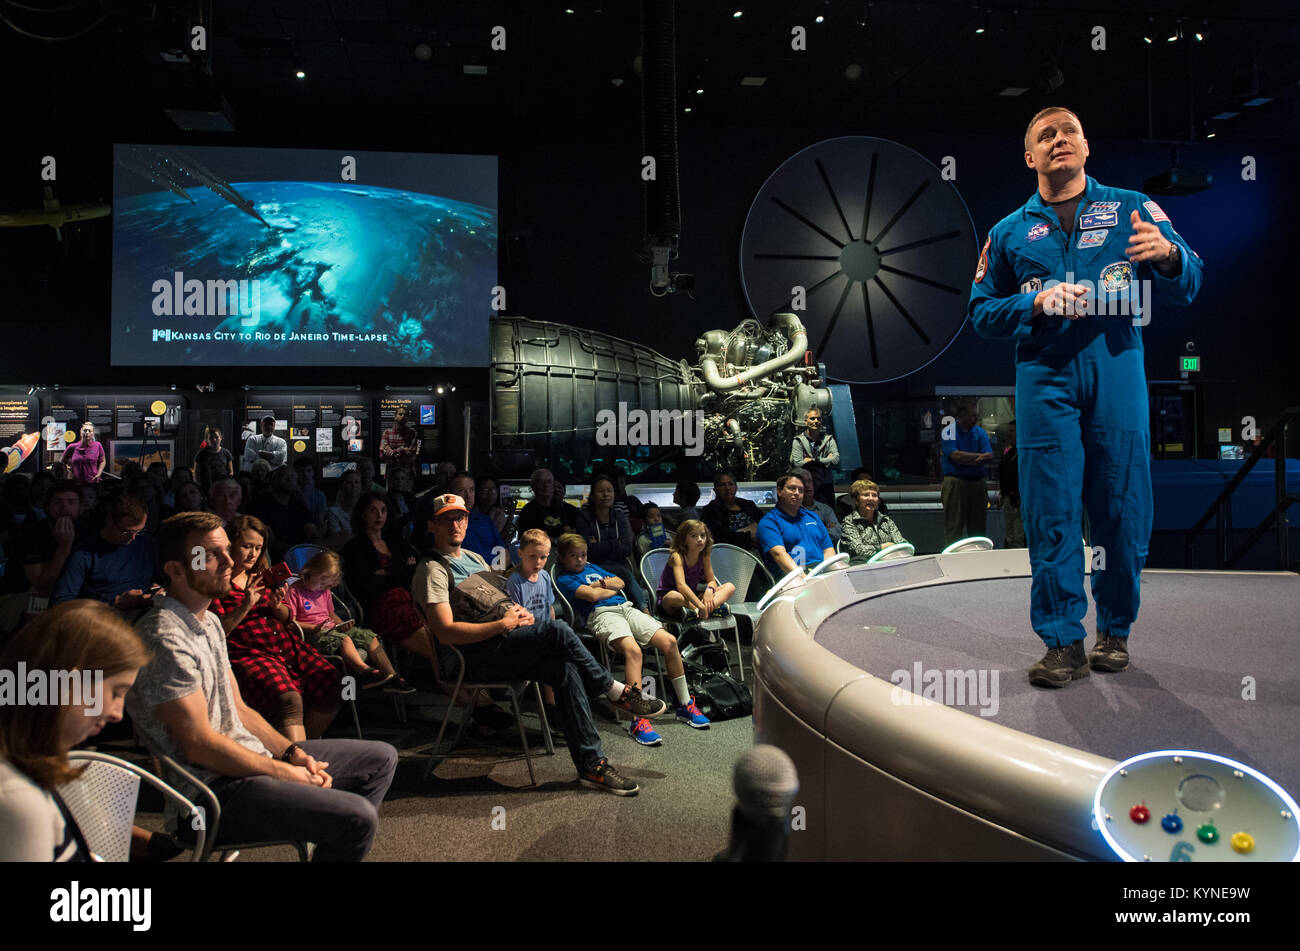 NASA astronaut Jack Fischer speaks about his time onboard the International Space Station (ISS) during Expeditions 51/52, Friday, Nov. 3, 2017 at Smithsonian's National Air and Space Museum in Washington. During Expedition 52, Fischer completed hundreds of scientific experiments and two spacewalks, and concluded his 136-day mission when he landed in a remote area near the town of Zhezkazgan, Kazakhstan in September 2017. Photo Credit: (NASA/Aubrey Gemignani) Stock Photo